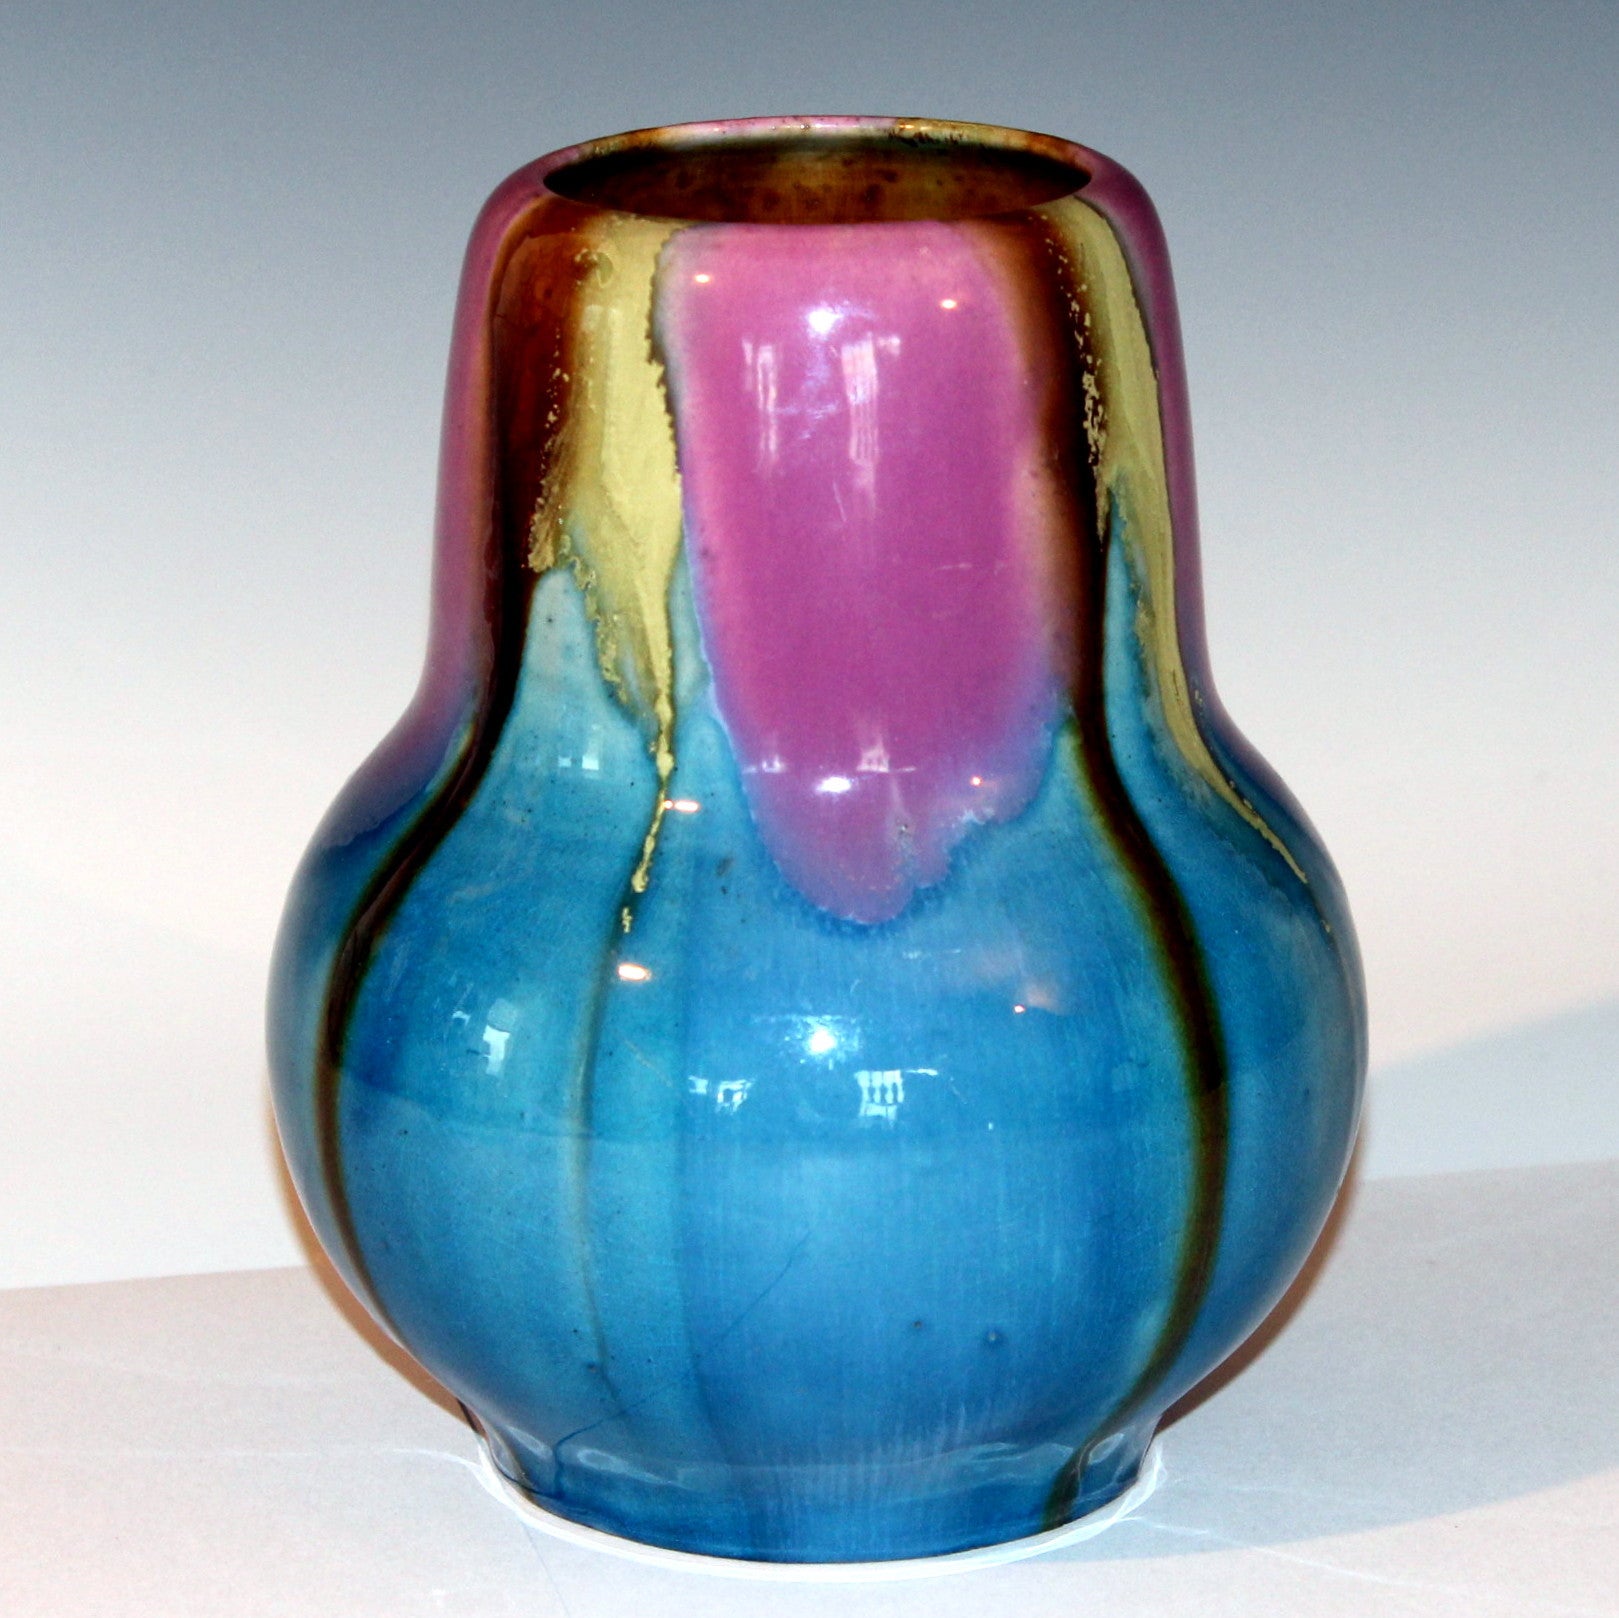 Awaji Art Deco Vase in Pink and Blue Flame Glaze